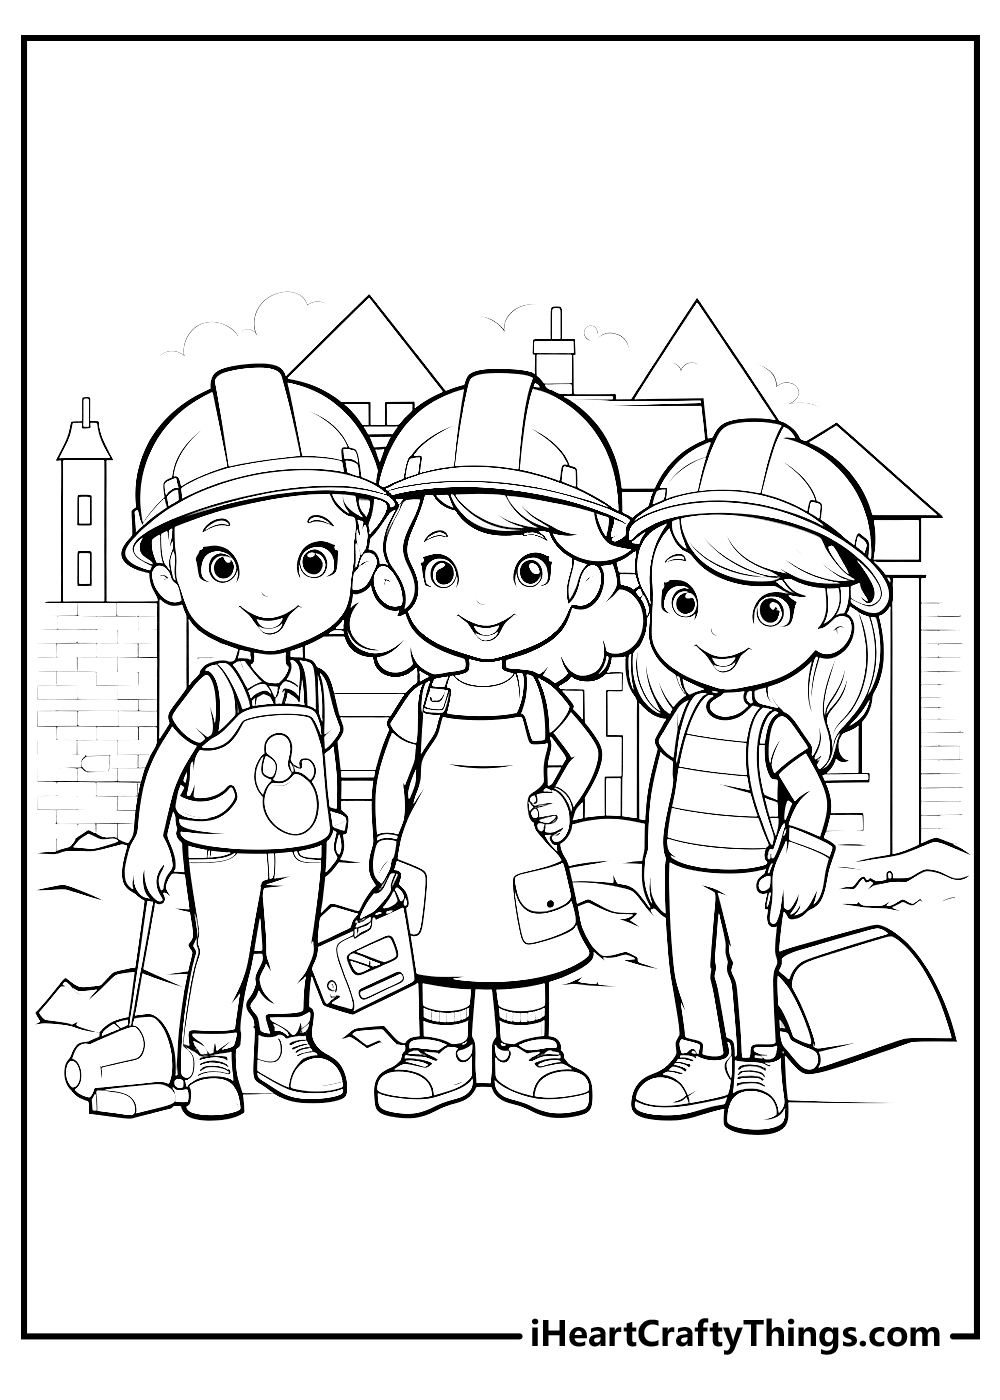 construction coloring sheet free download